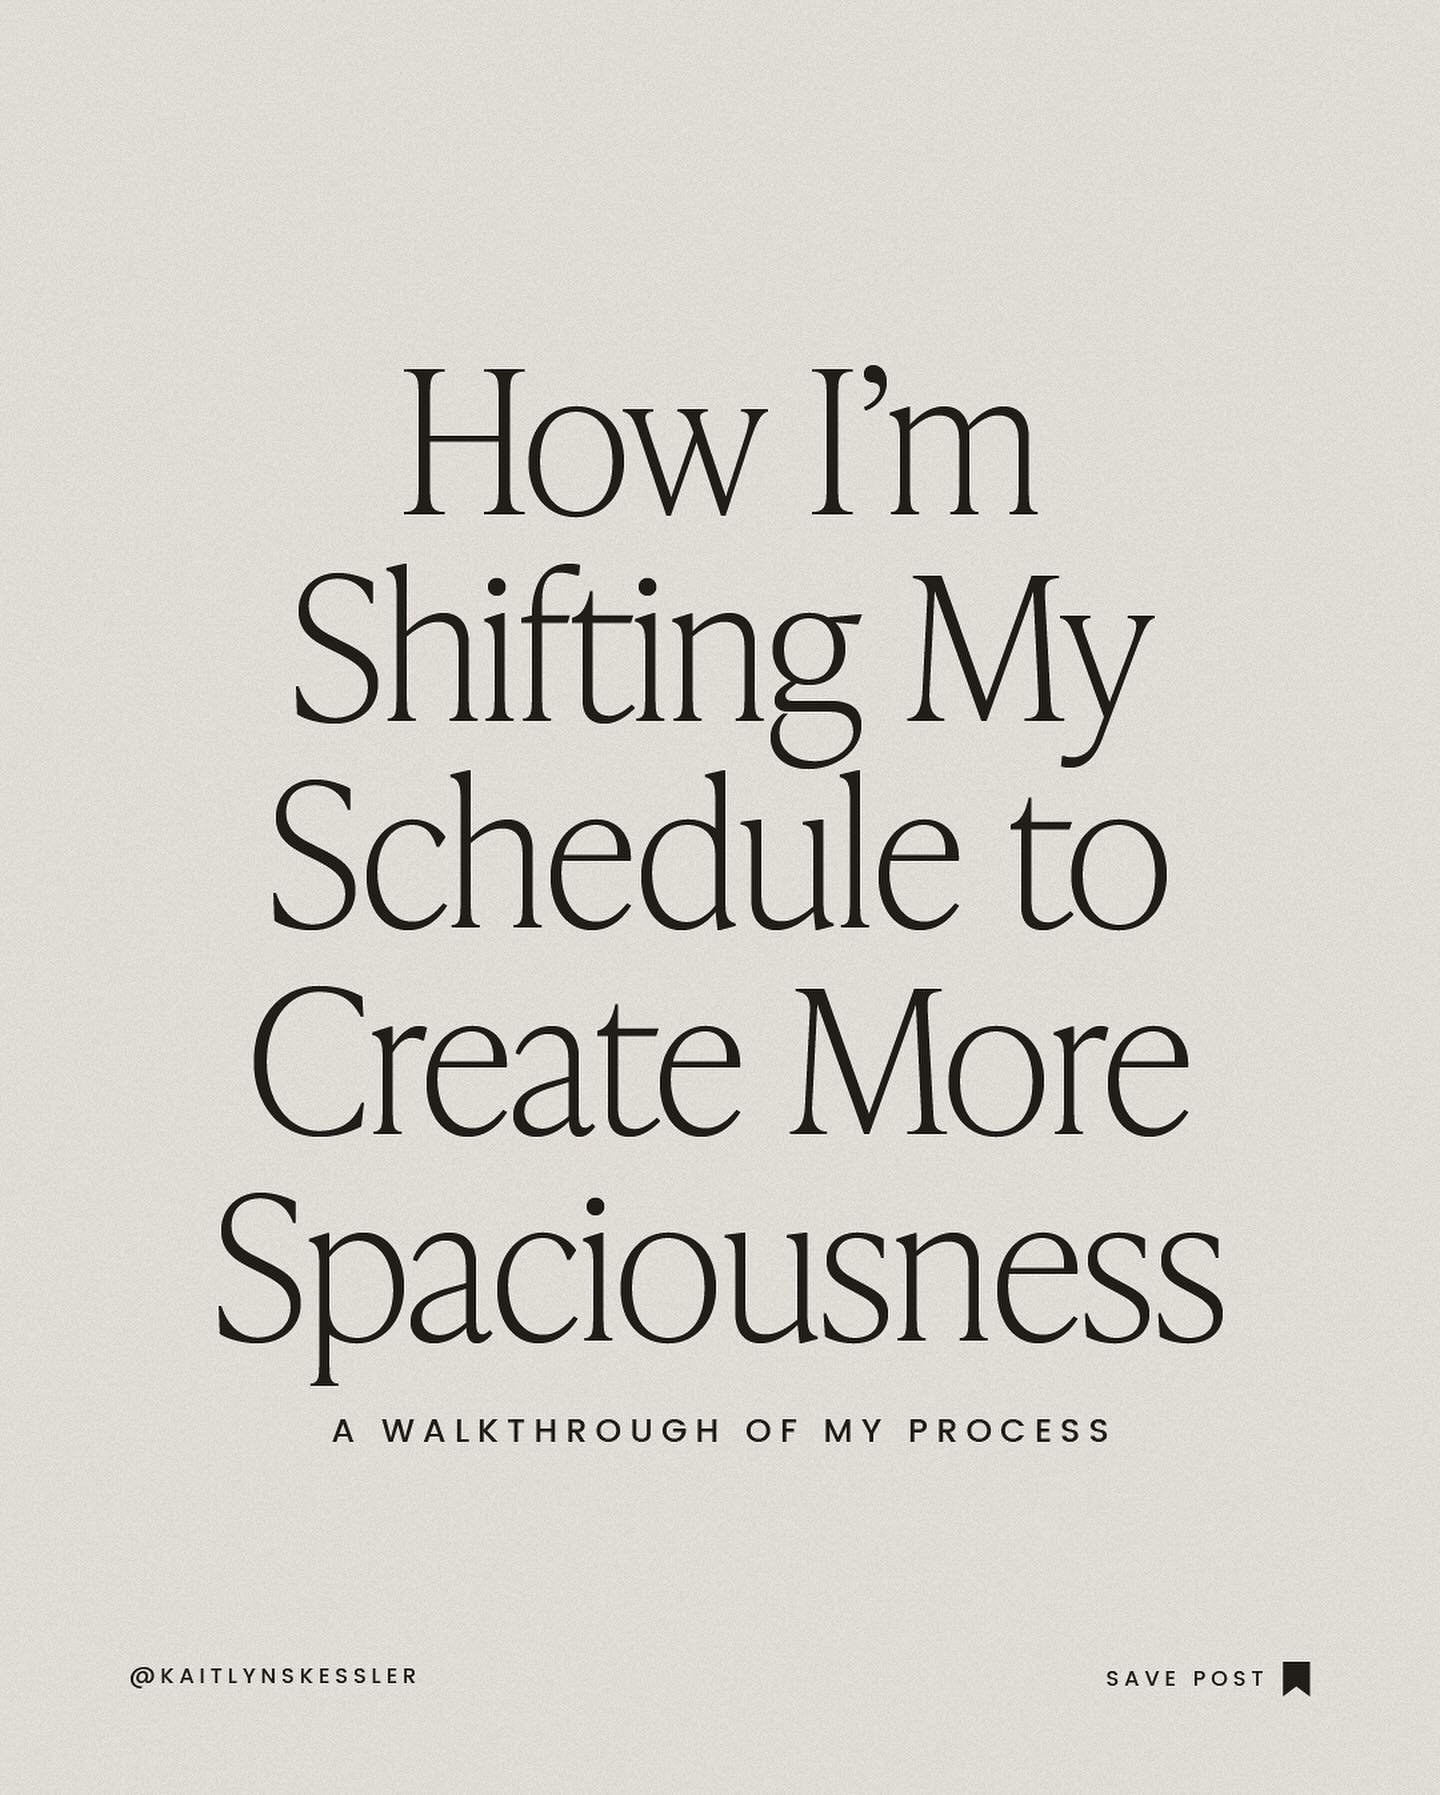 We needed a lil update&mdash;

So here&rsquo;s what I did to shift my schedule for this season and give myself more spaciousness.

One last helpful point:

The hardest part about shifts like this isn&rsquo;t ideating them, it&rsquo;s sticking to the 